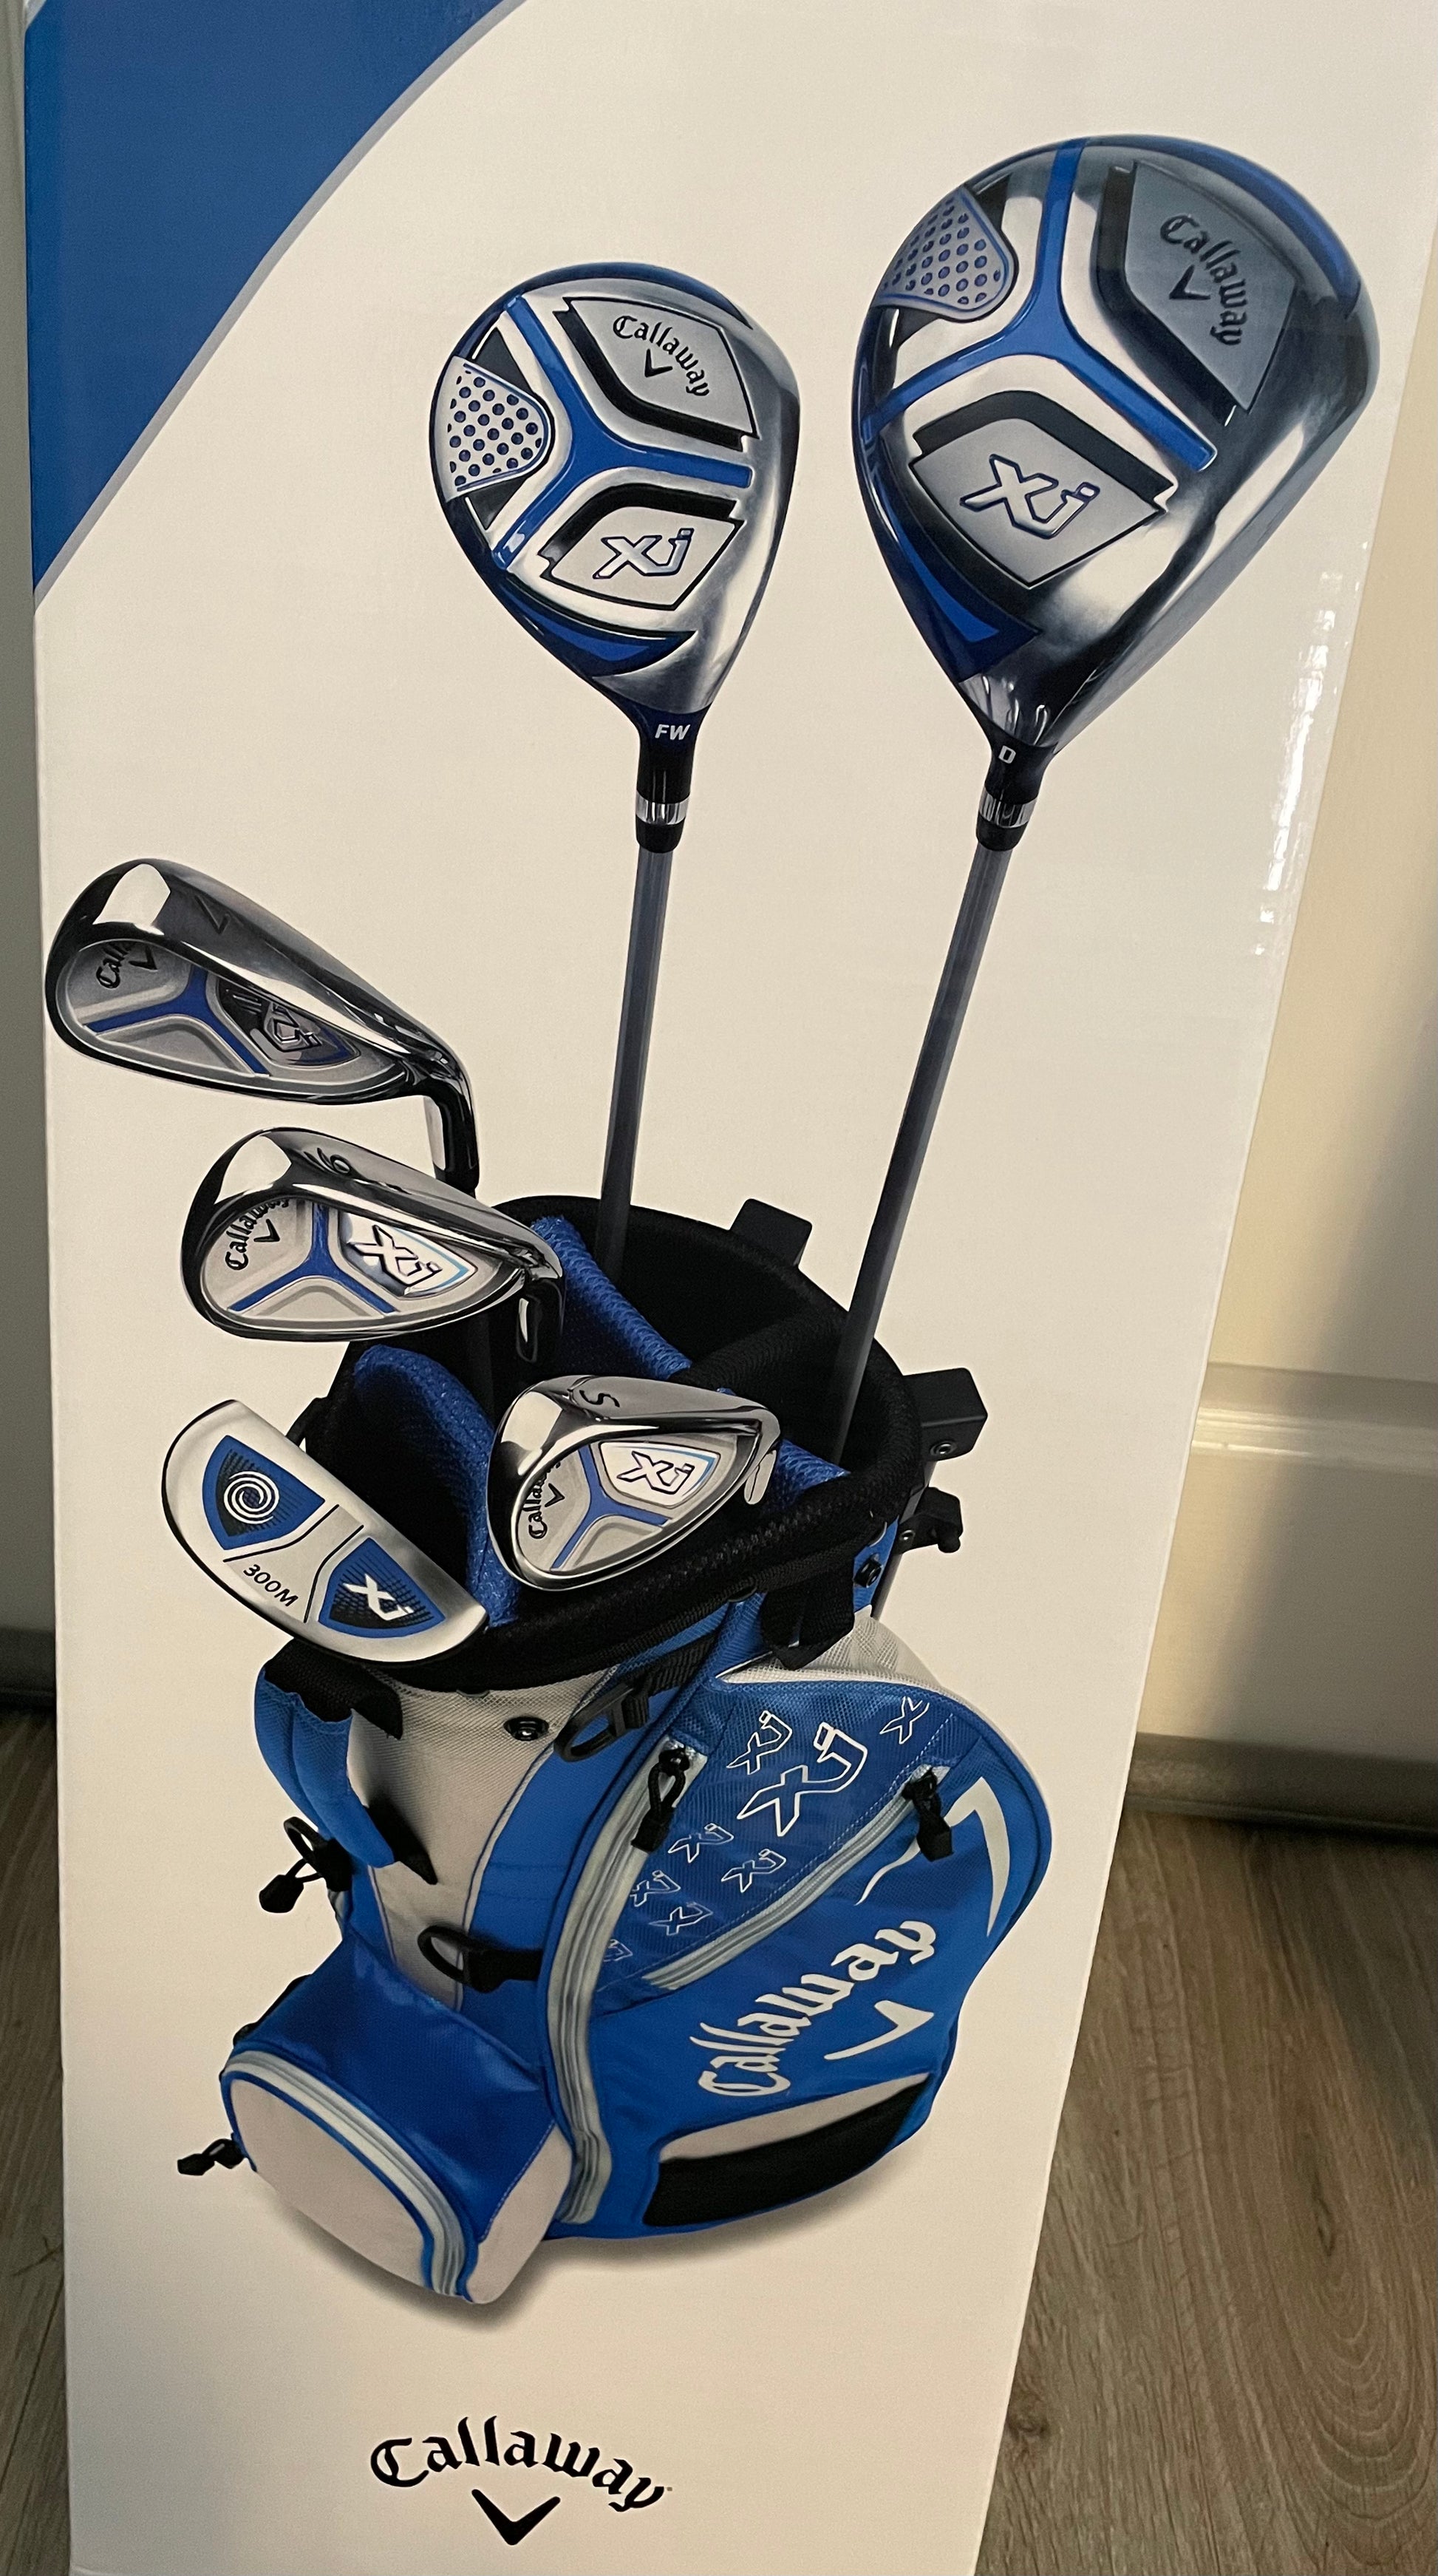 Callaway junior sets (XJ, XT) designed to cover kids' needs from